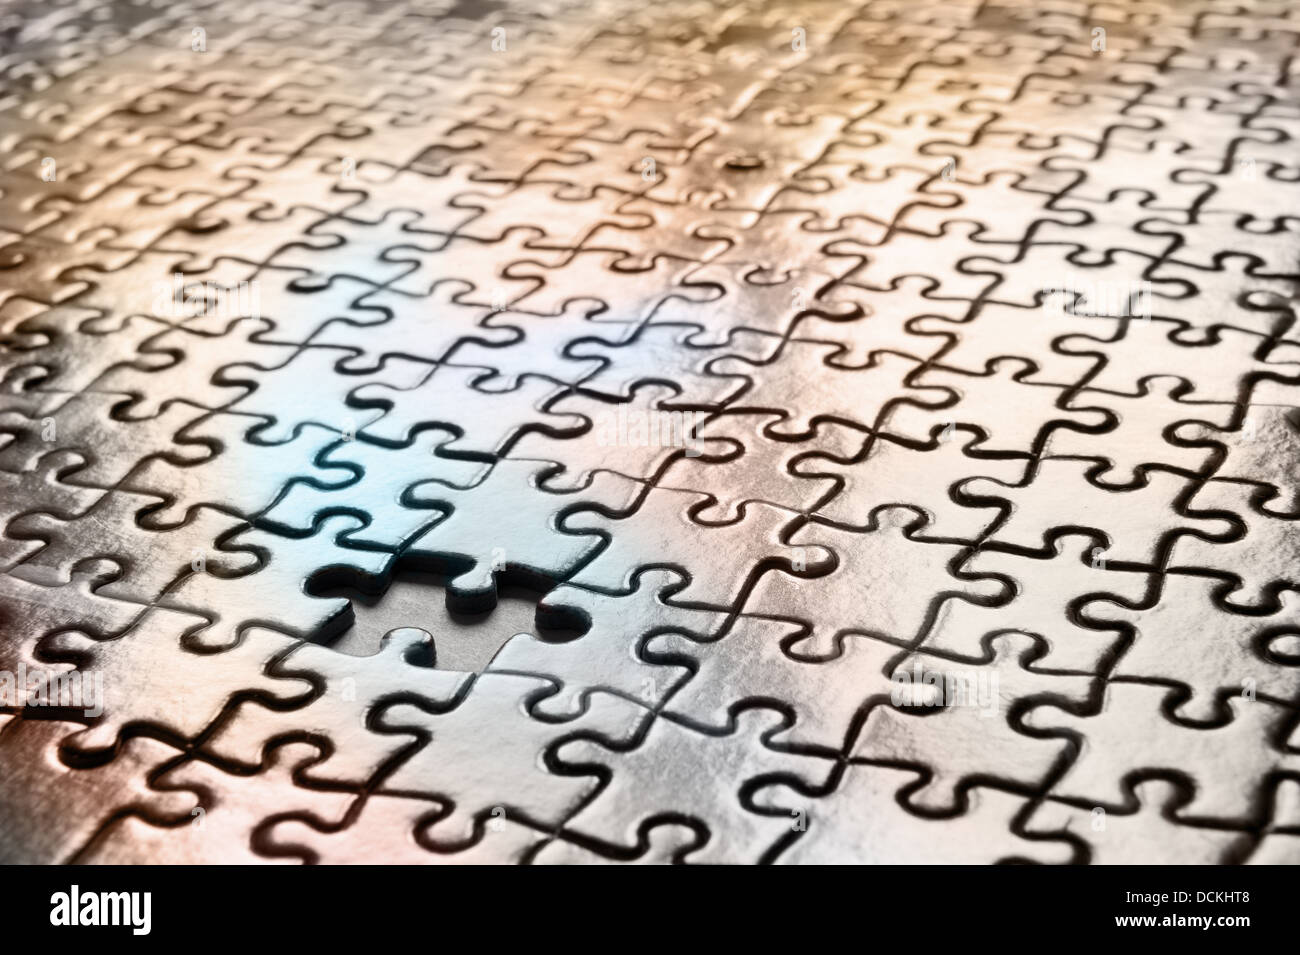 missing jigsaw puzzle interlocking pieces pattern to solve meshed together in one correct outcome as each piece a unique shape Stock Photo